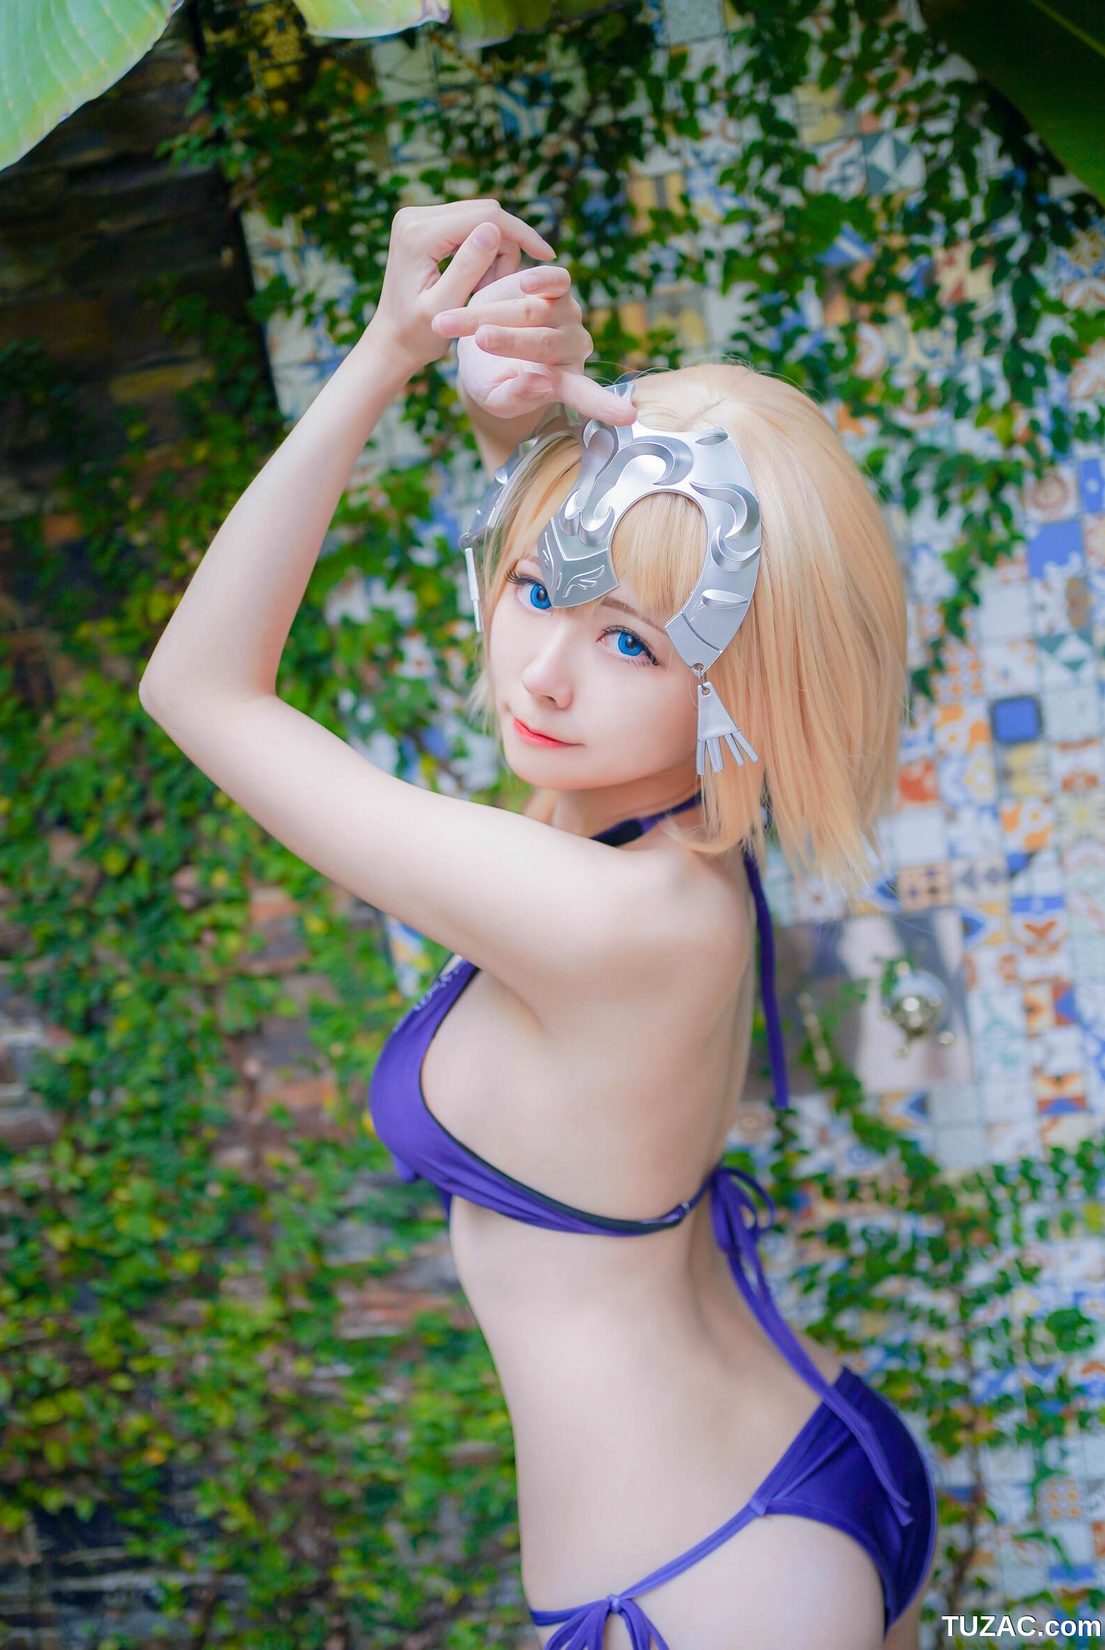 - Jeanne - - Arty d Arc - - Huang Ȼ - - Arty cosplay 3ҳ